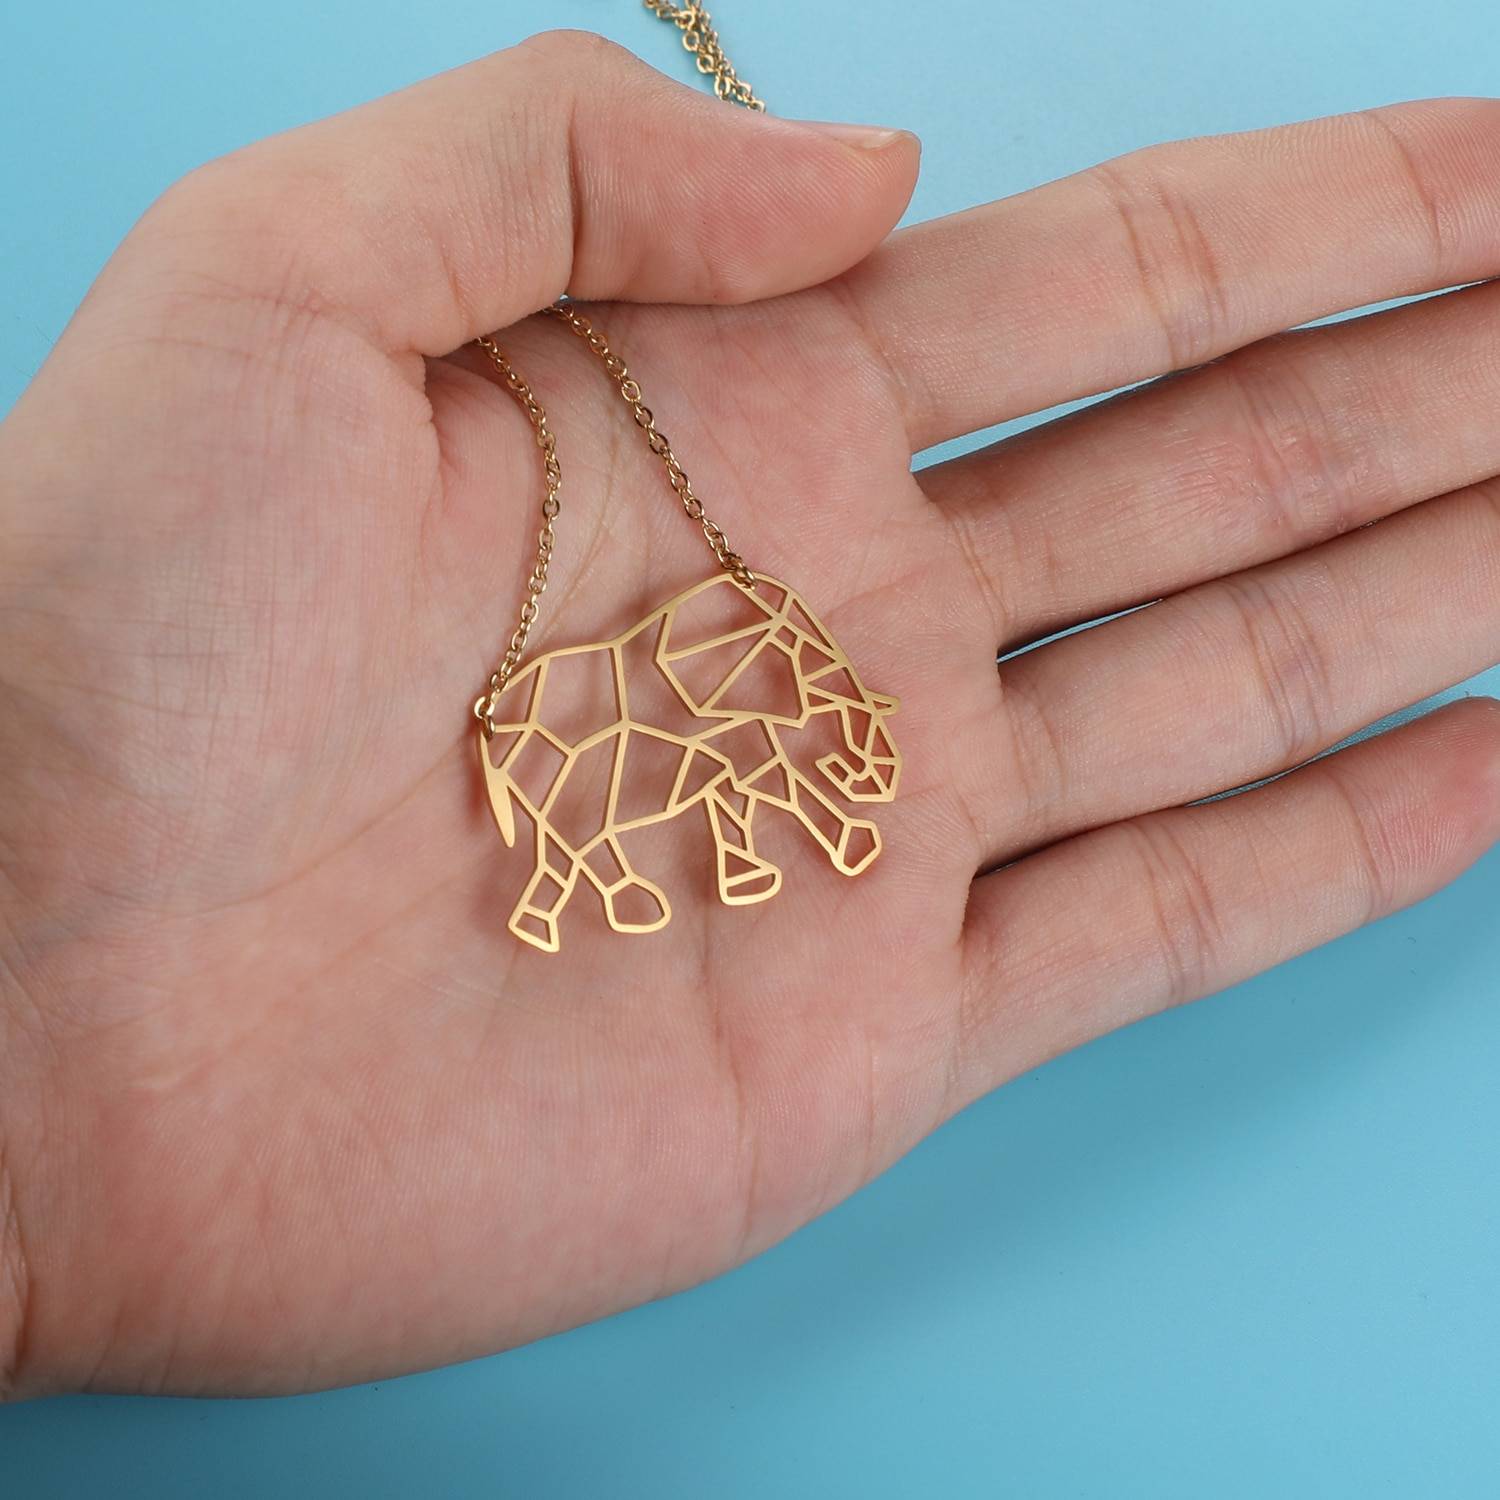 Majestic Elephant Origami Necklace in hand